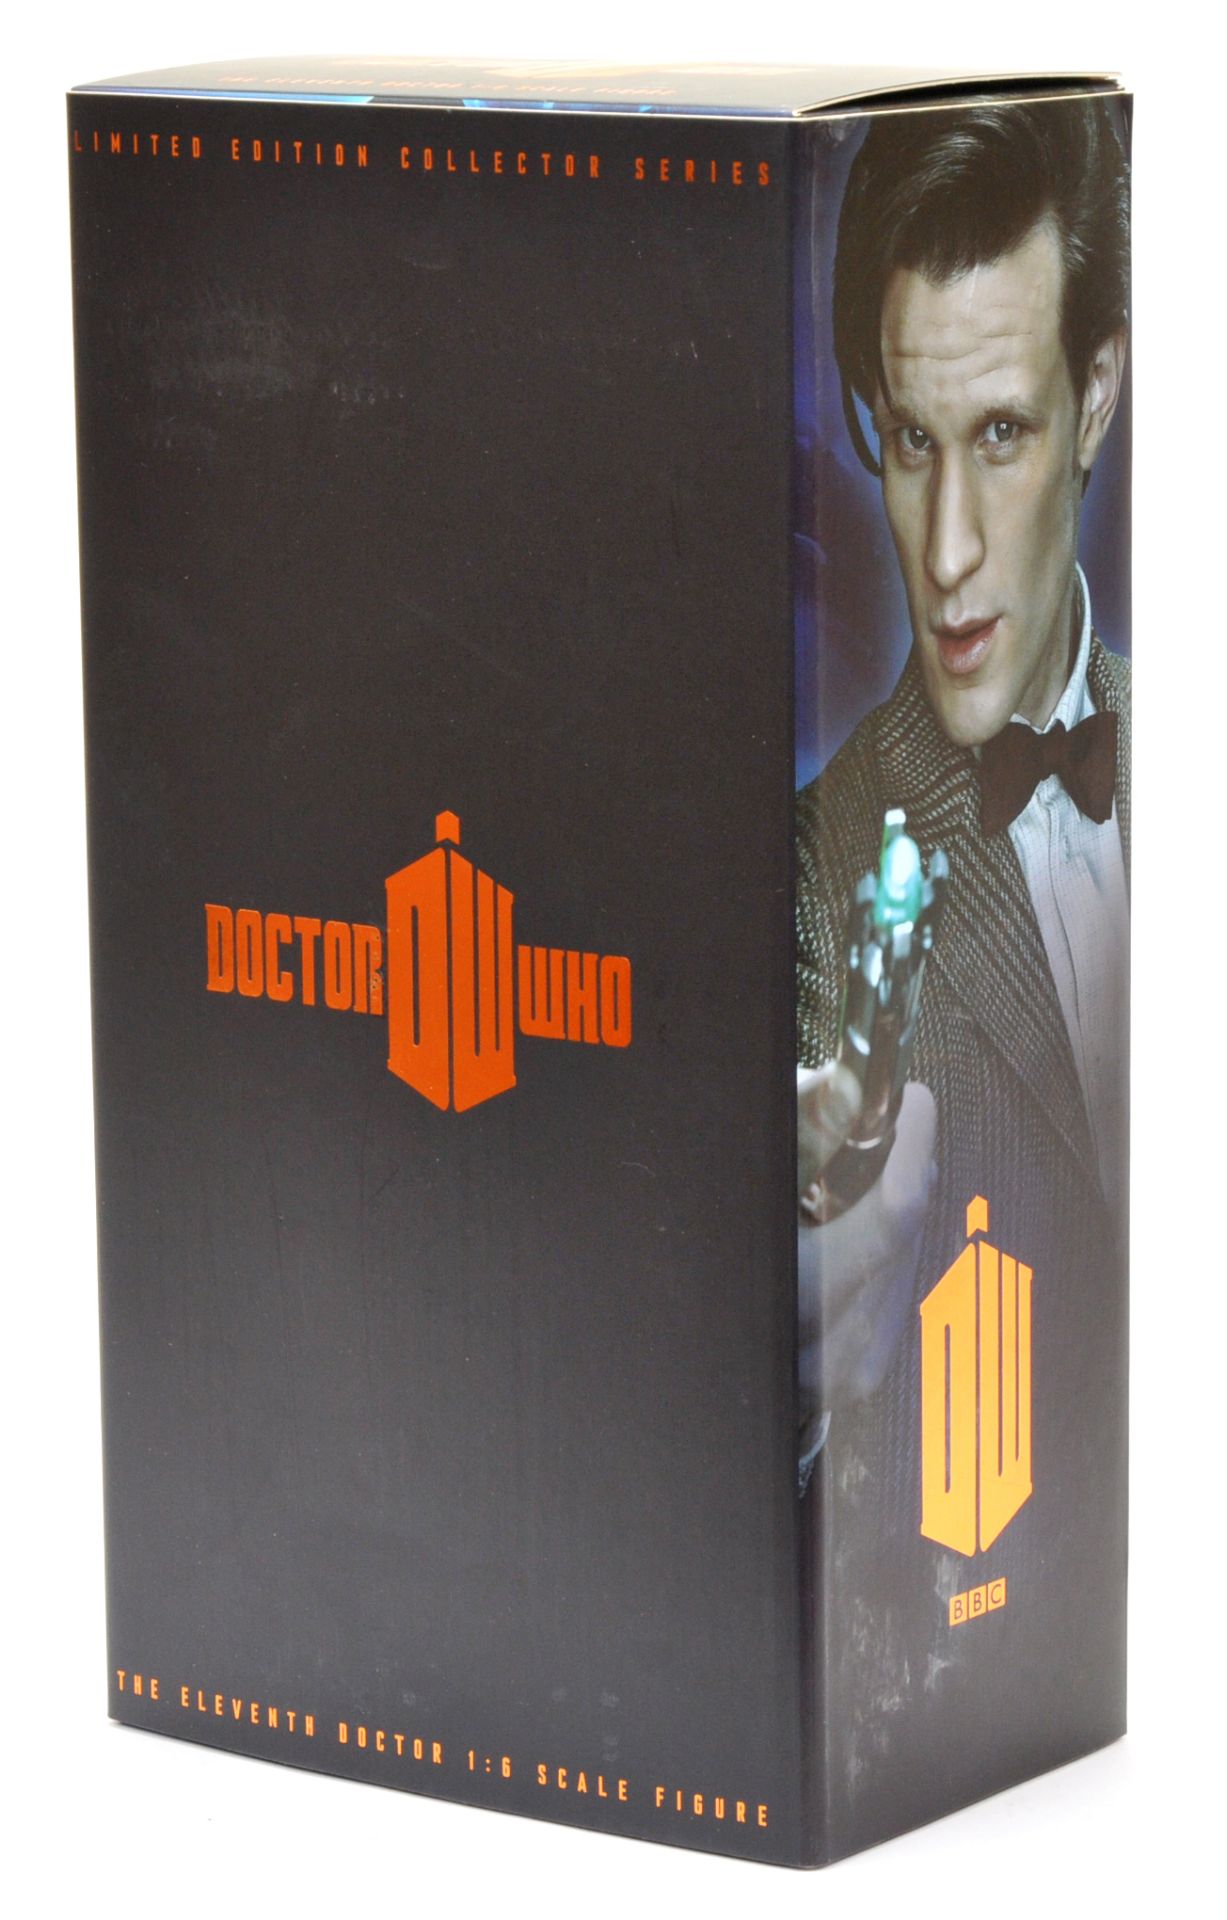 Big Chief Studios 50th Anniversary Doctor Who Collectors Figure 11th Doctor